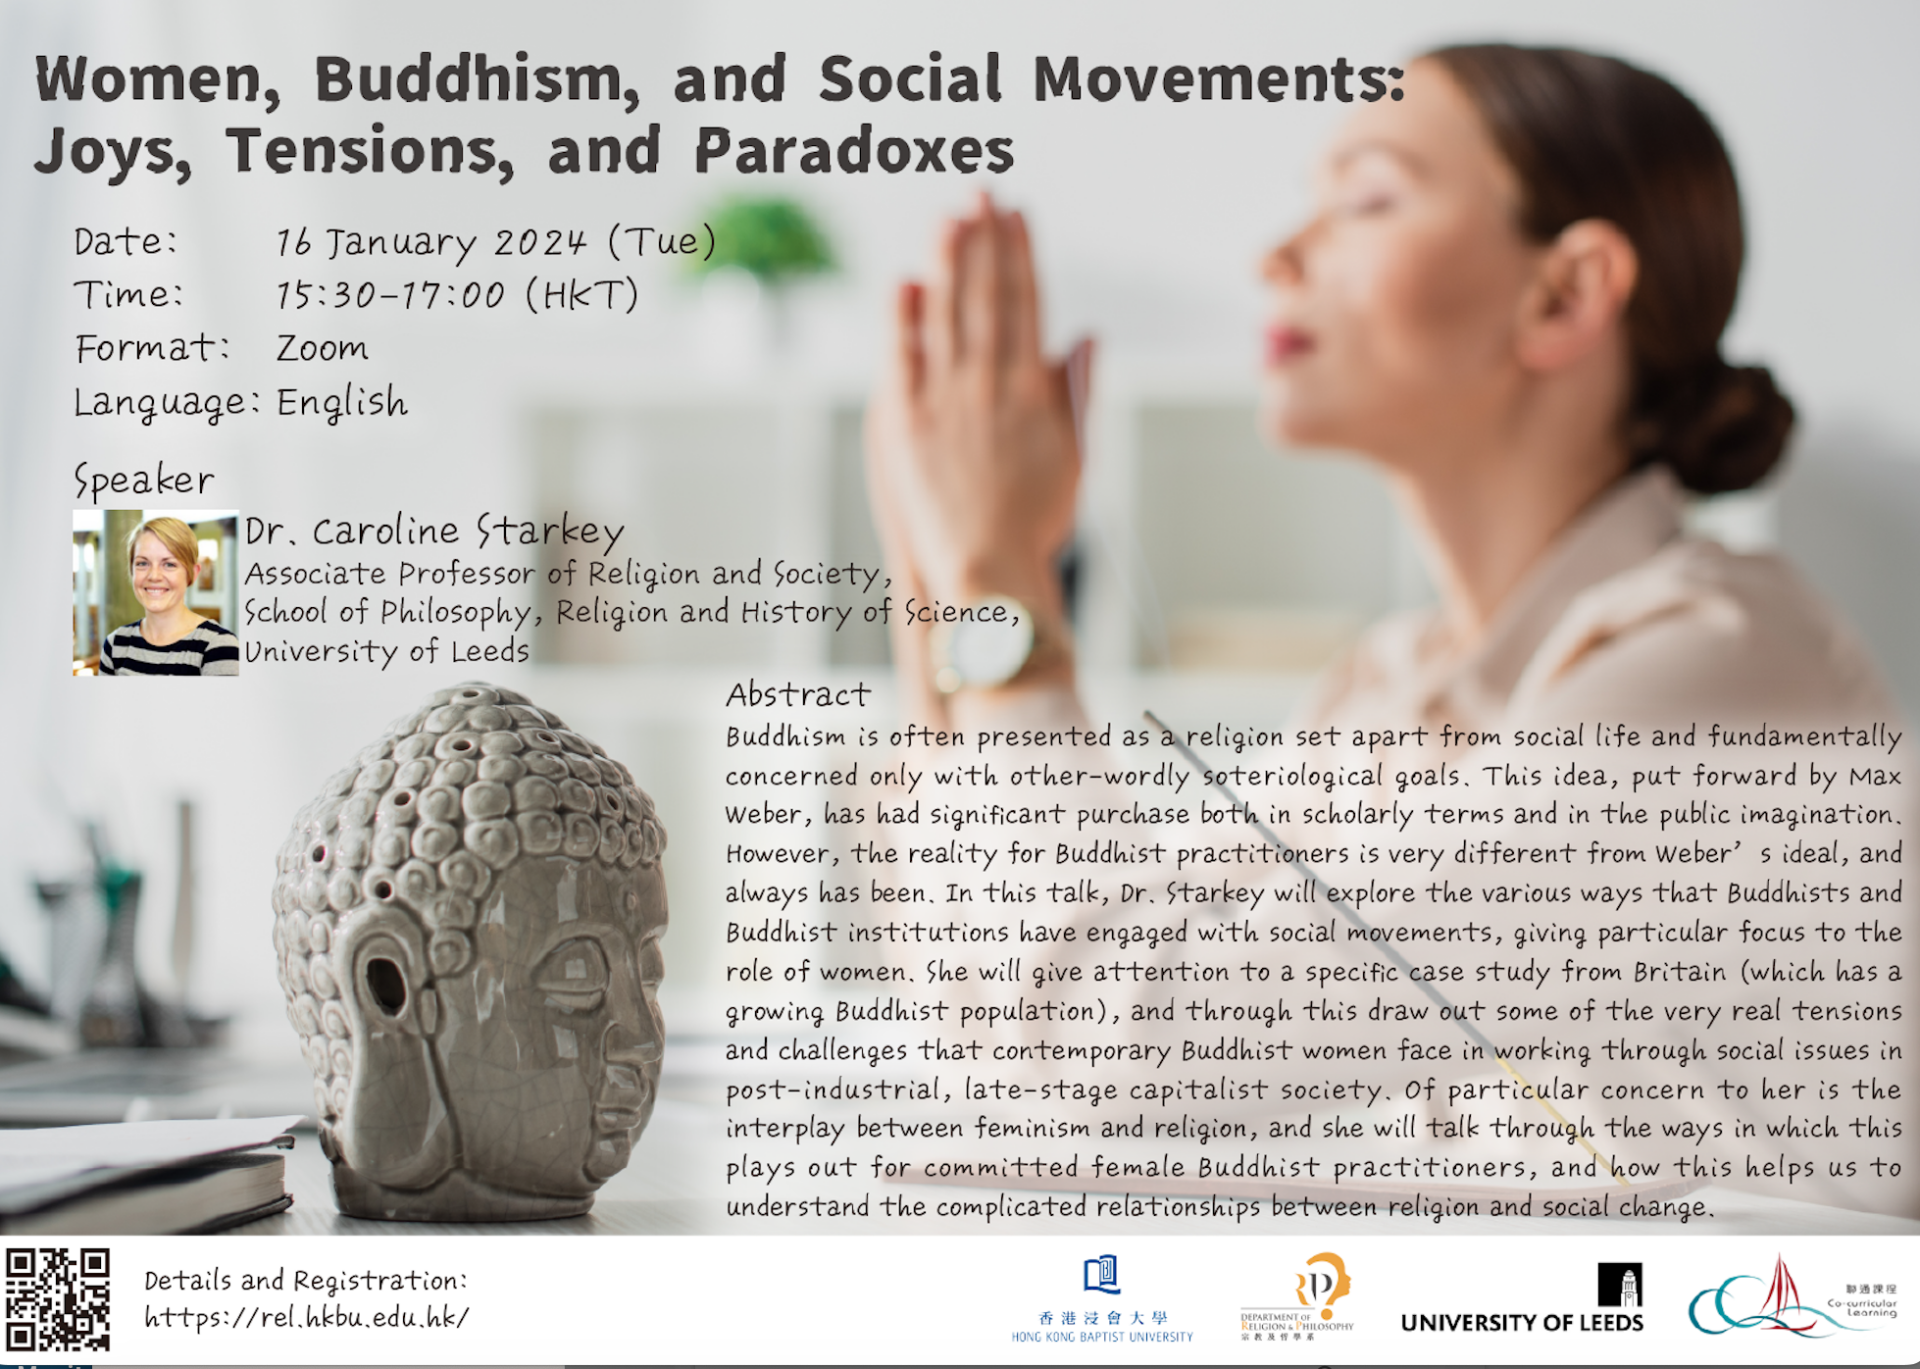 Women, Buddhism, and Social Movements